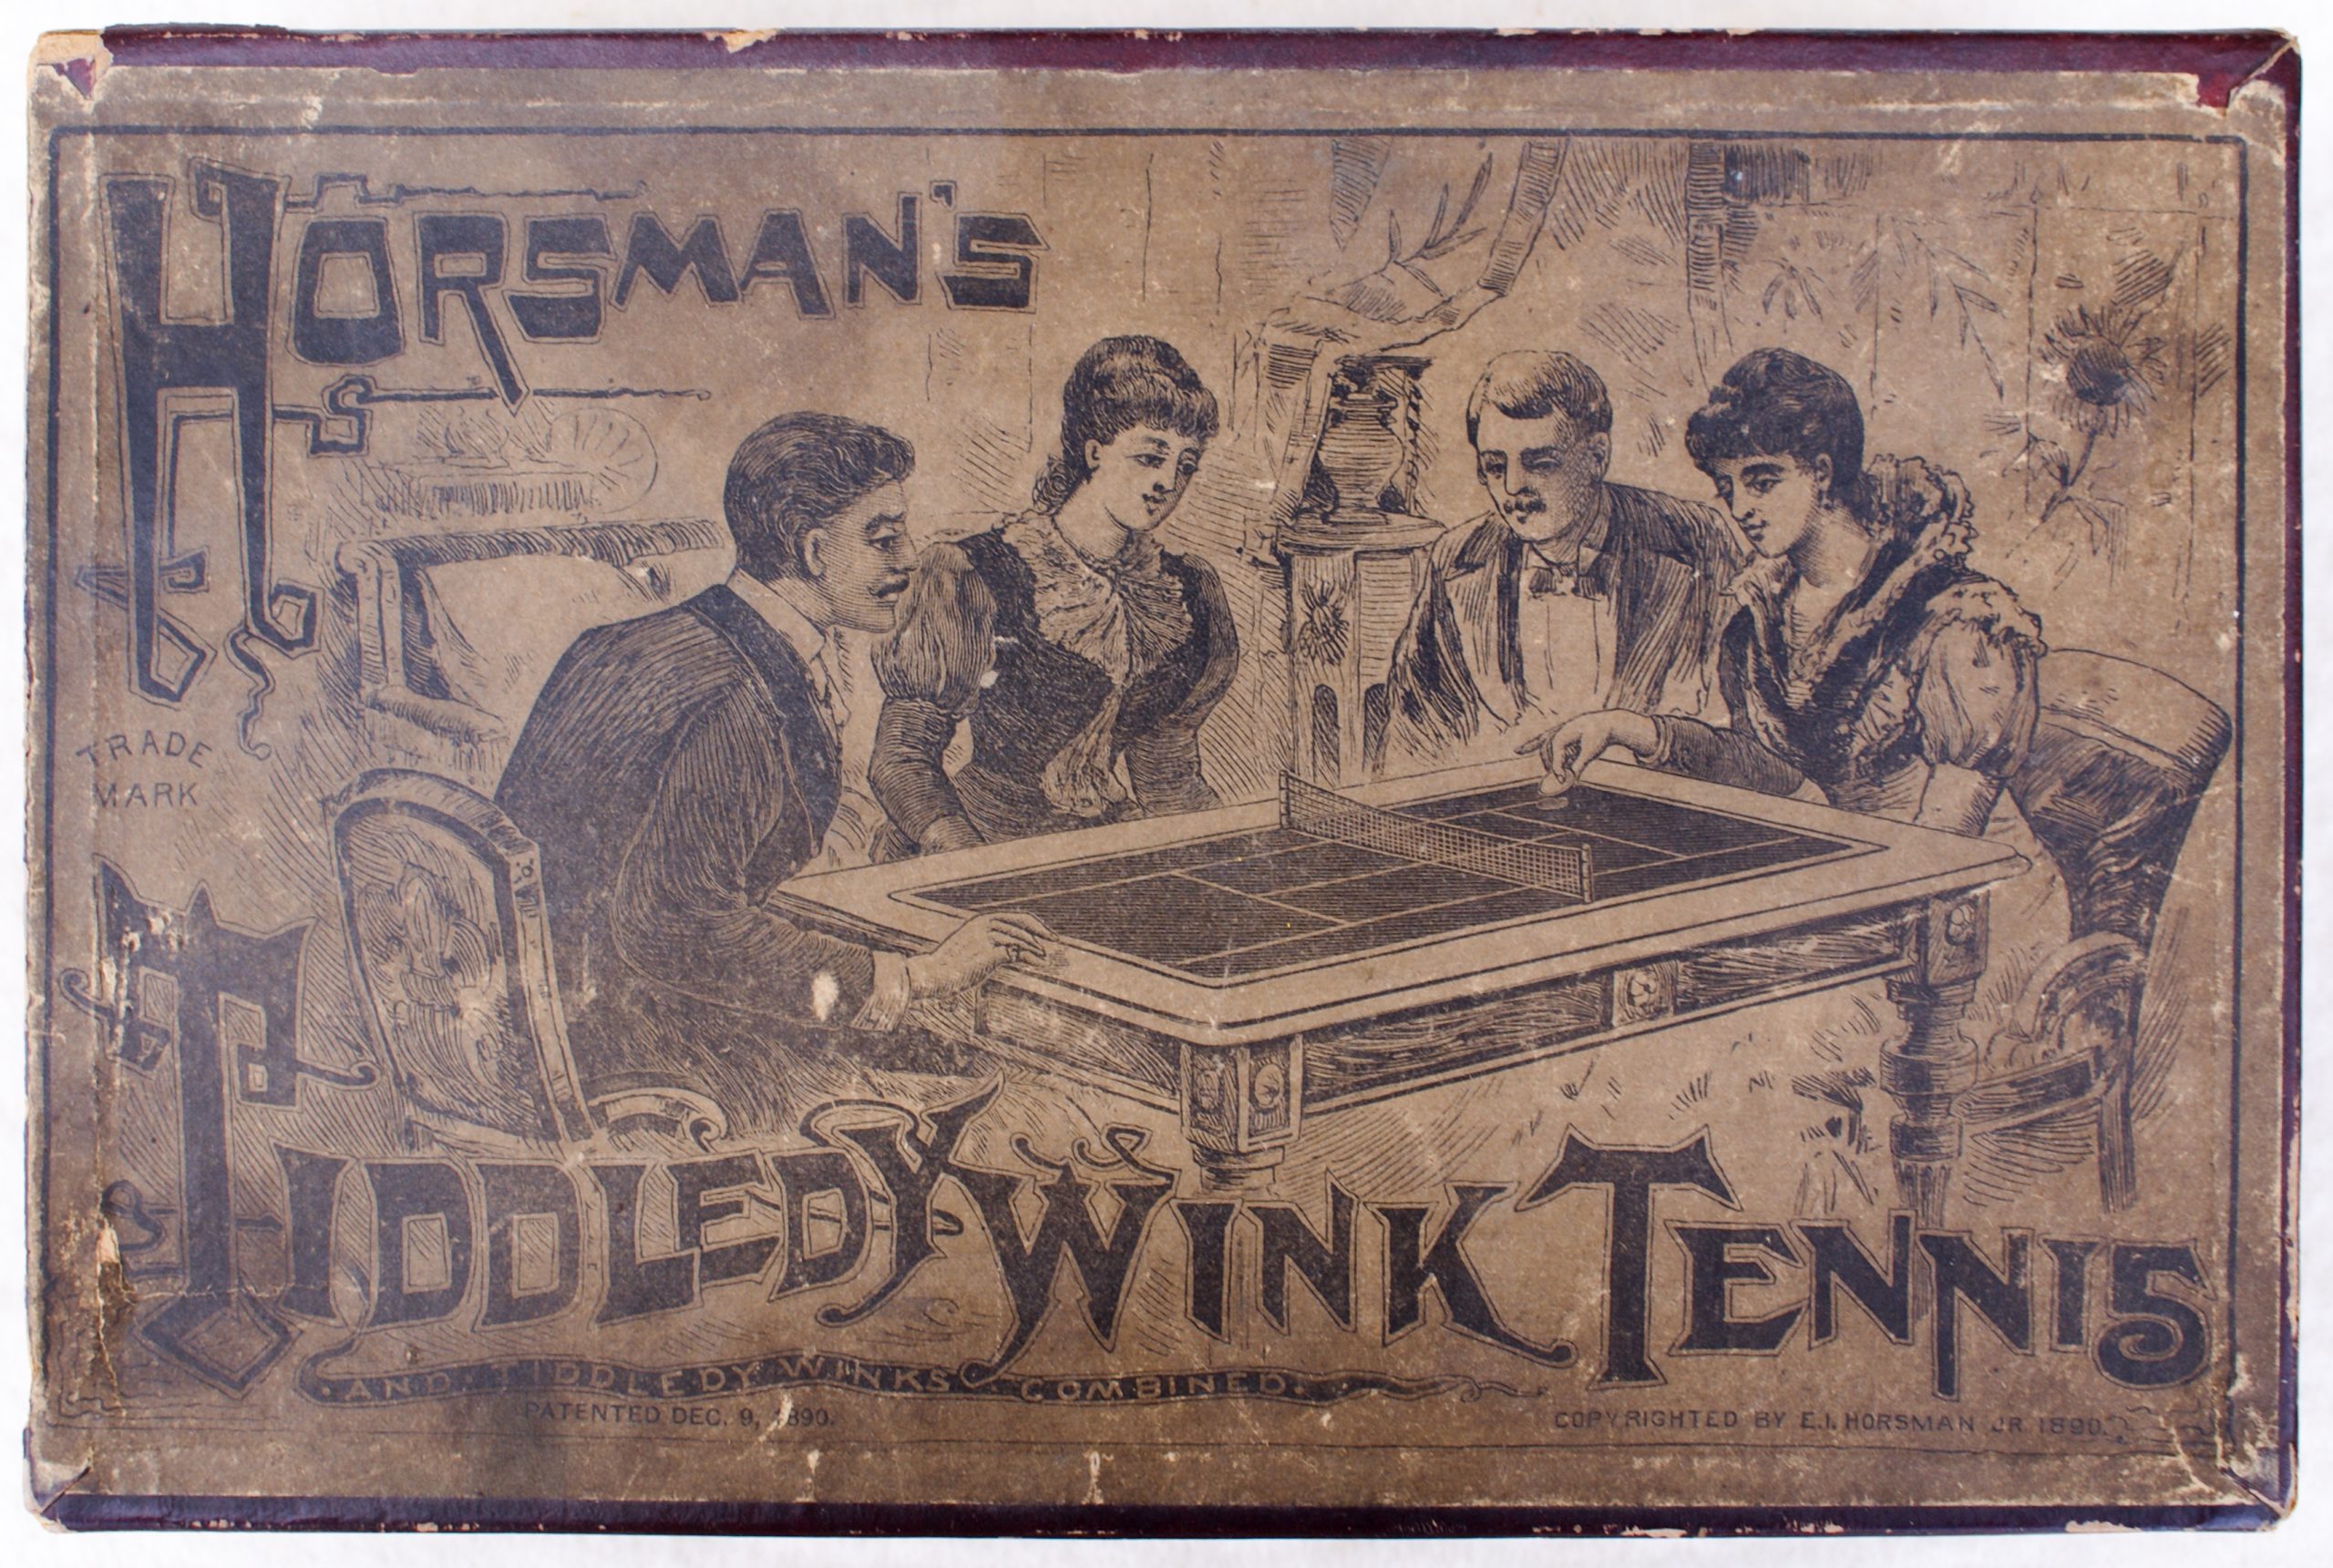 Tucker Tw ID • HOR-01c1 — publisher • E. I. Horsman, Jr. — title • HORSMAN's TIDDLED YWINK TENNIS AND TIDDLEDY WINKS COMBINED.